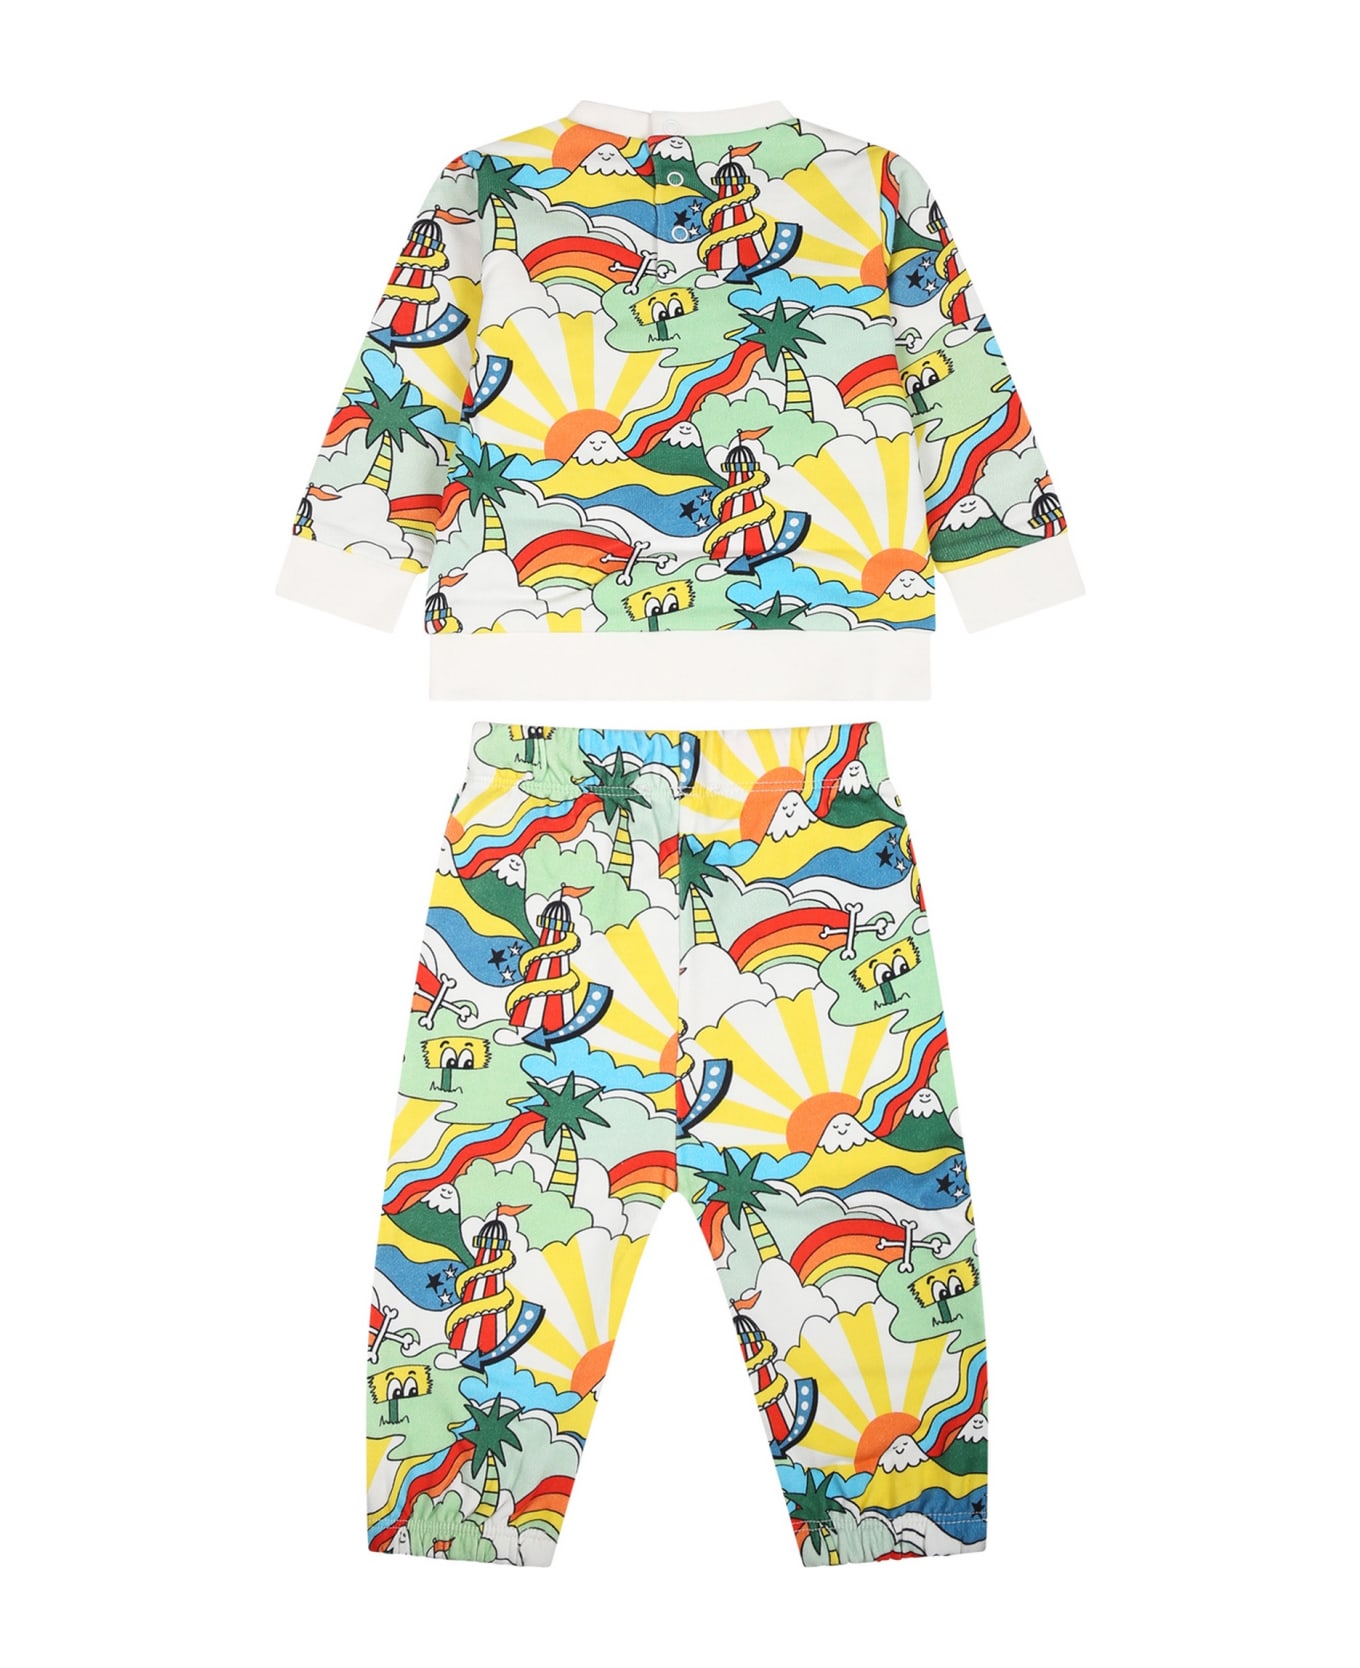 Stella McCartney Kids White Suit For Baby Boy With Print - Multicolor